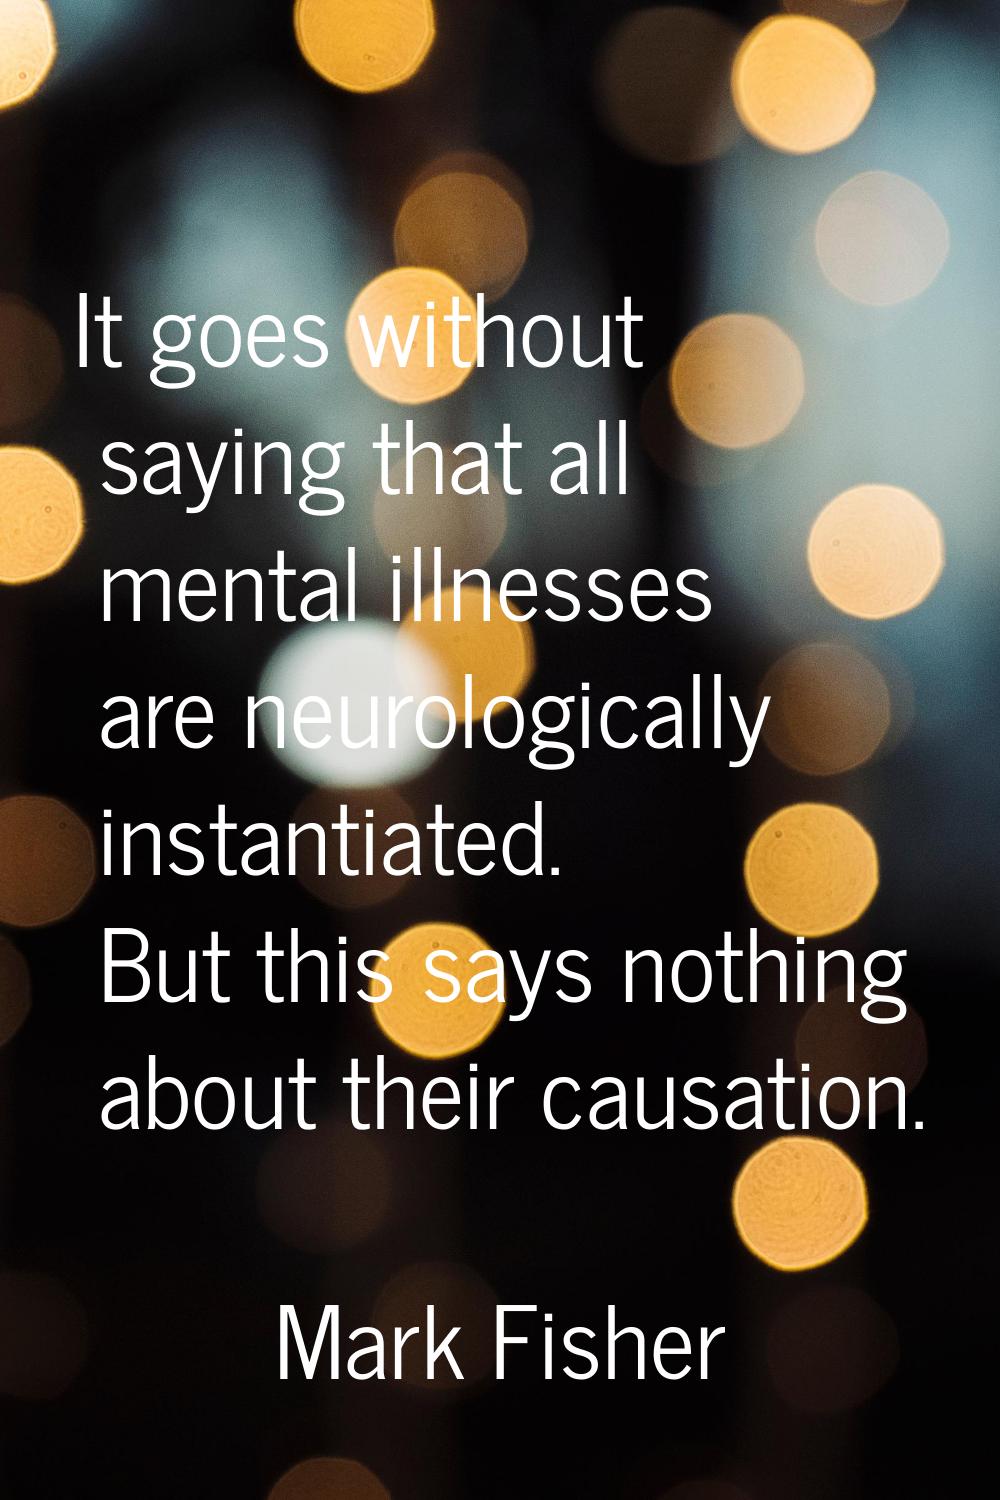 It goes without saying that all mental illnesses are neurologically instantiated. But this says not